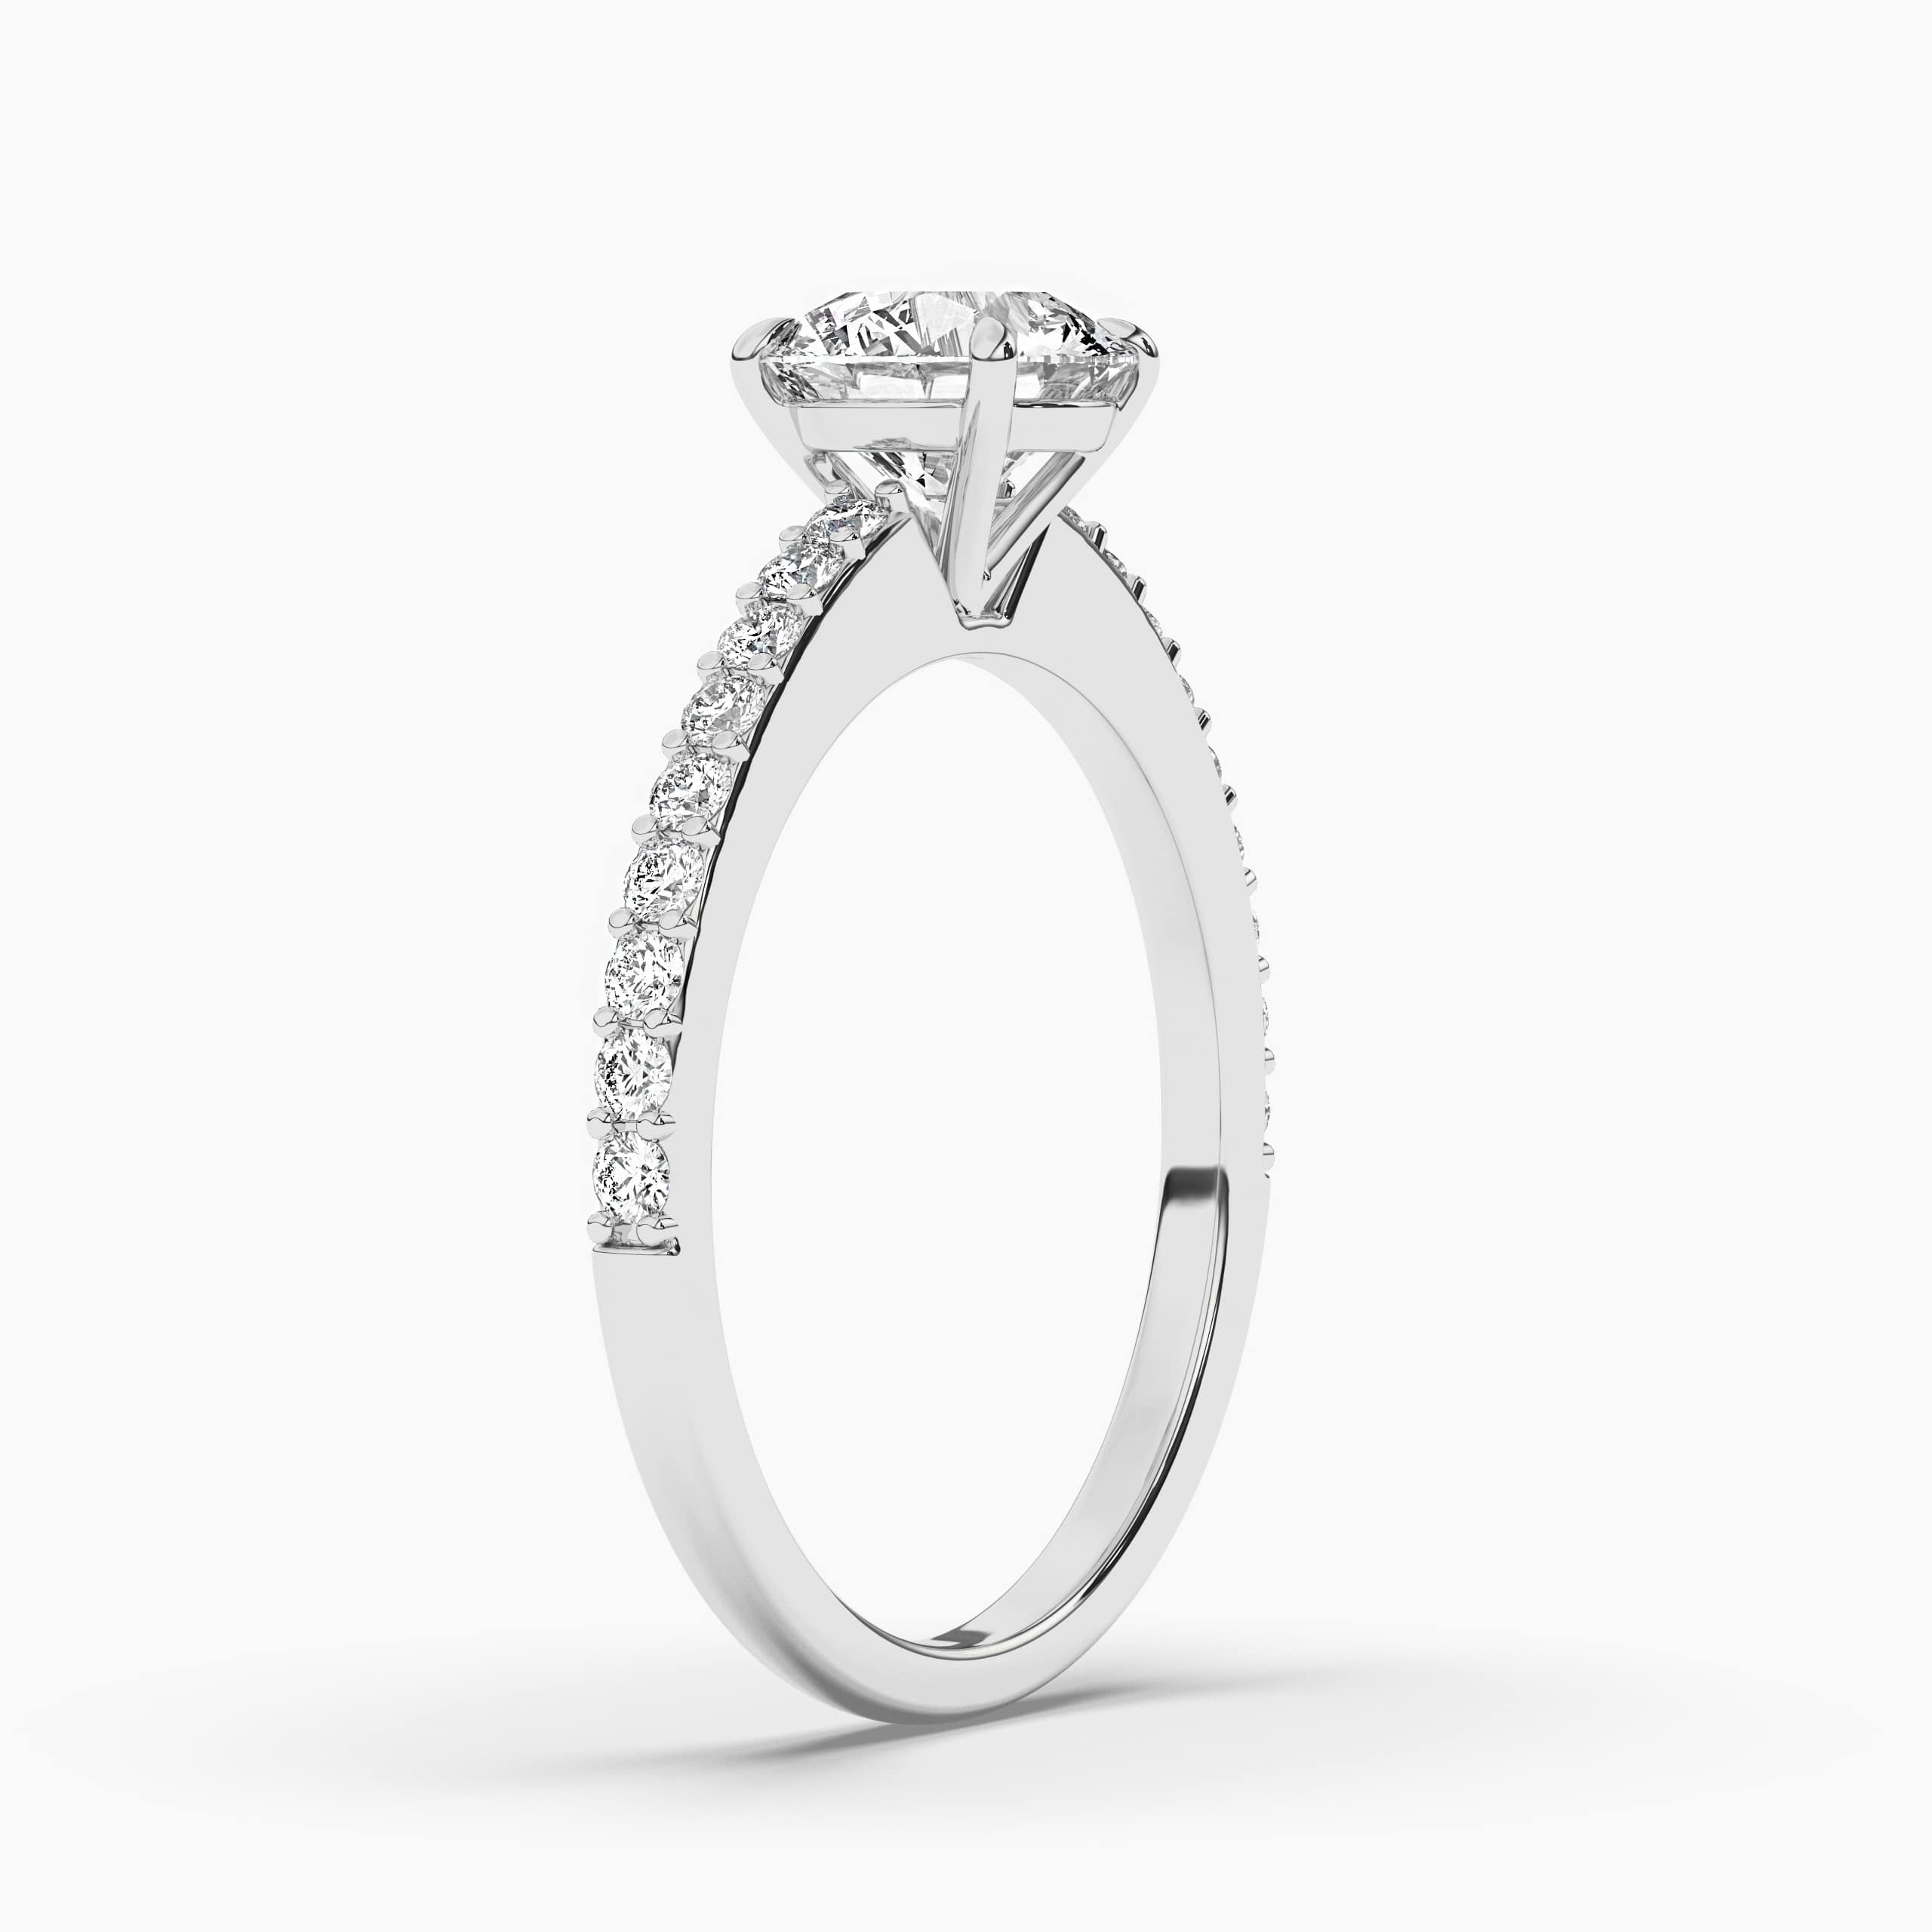 Round Cut Diamond Engagement Ring with Side Stones in White Gold